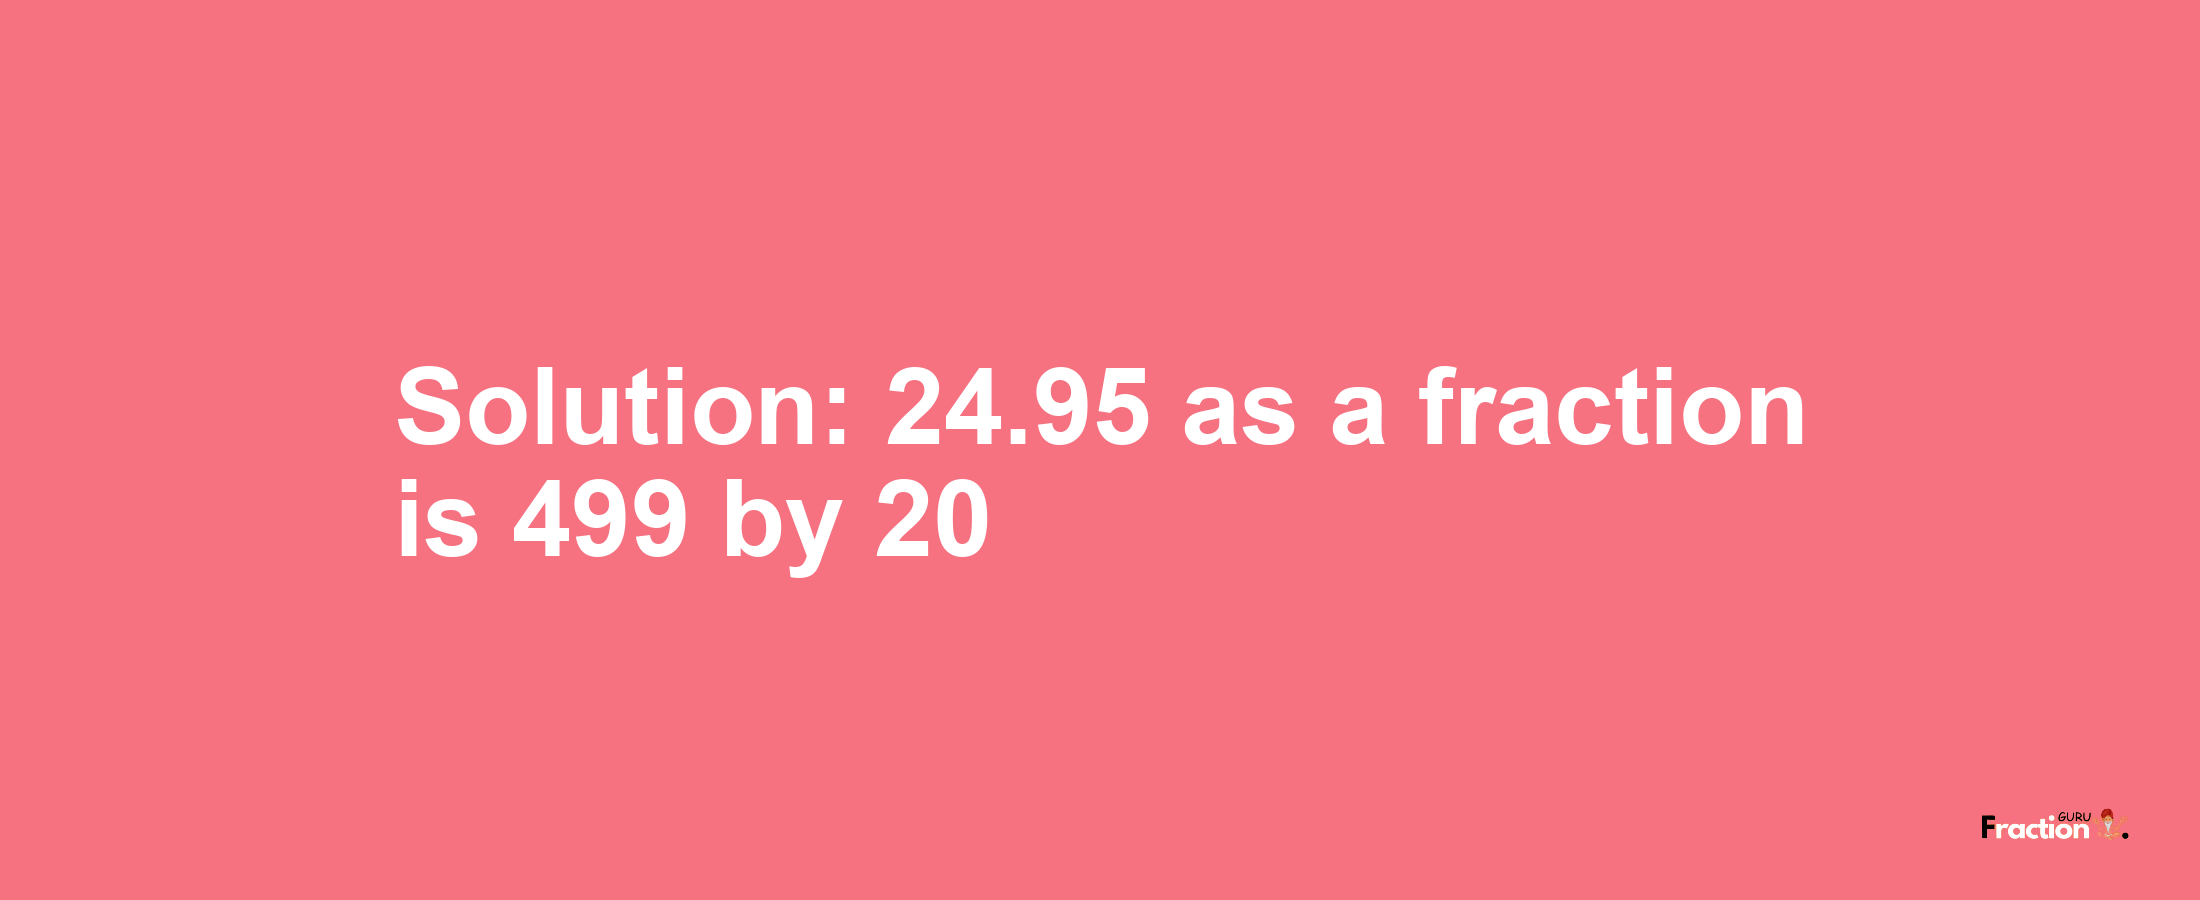 Solution:24.95 as a fraction is 499/20